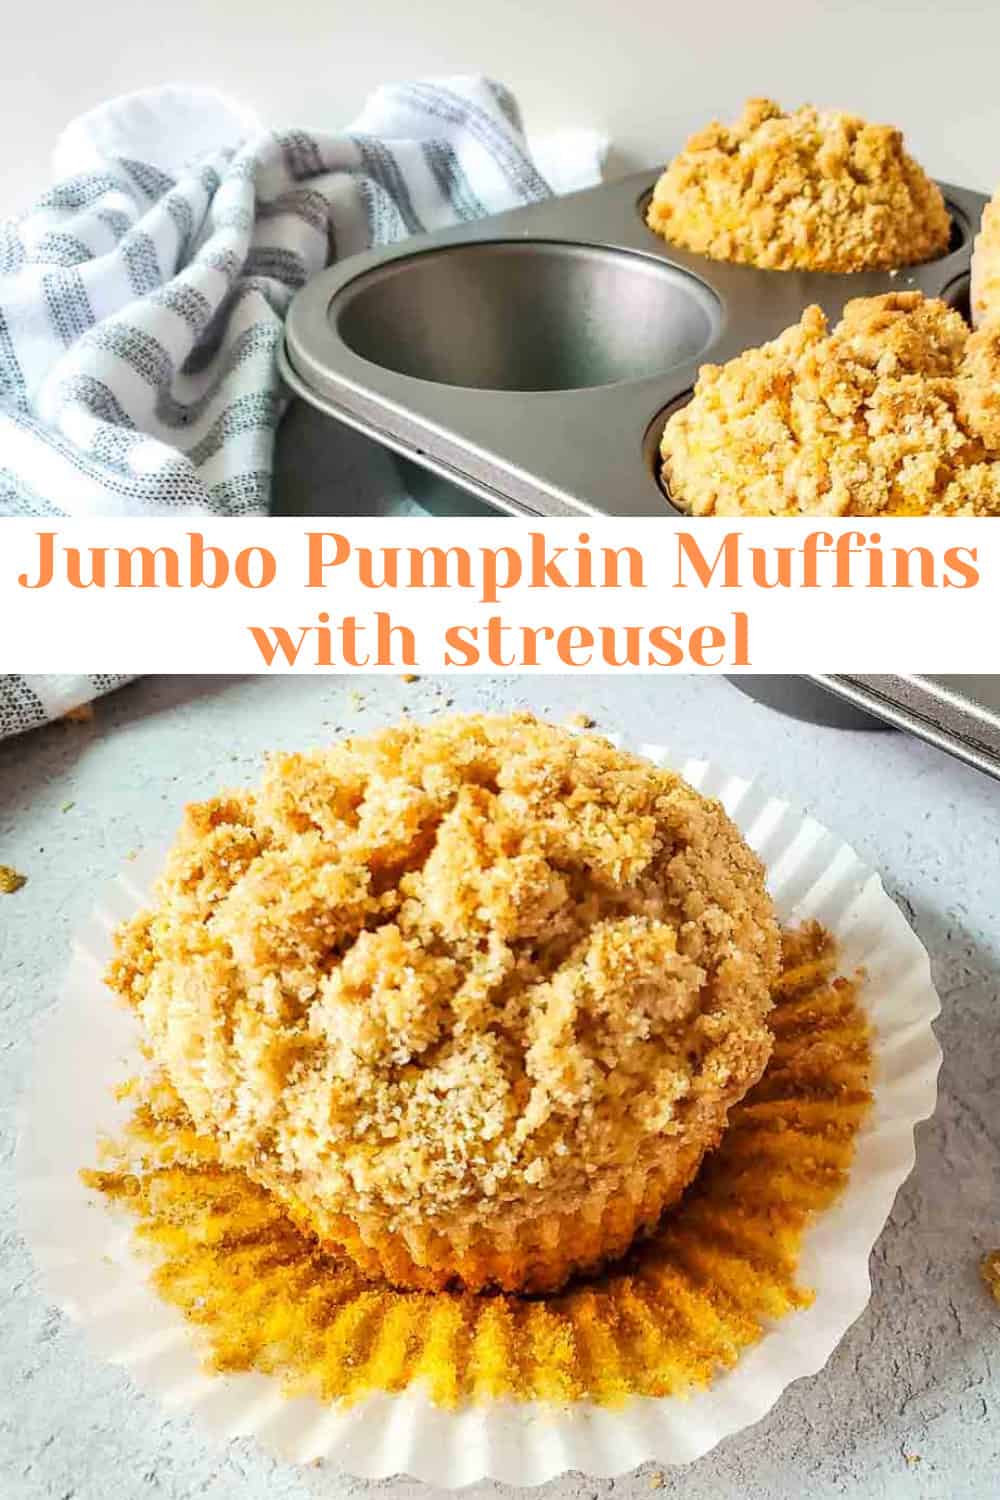 Jumbo pumpkin muffins with struesel baked in a muffin tin.